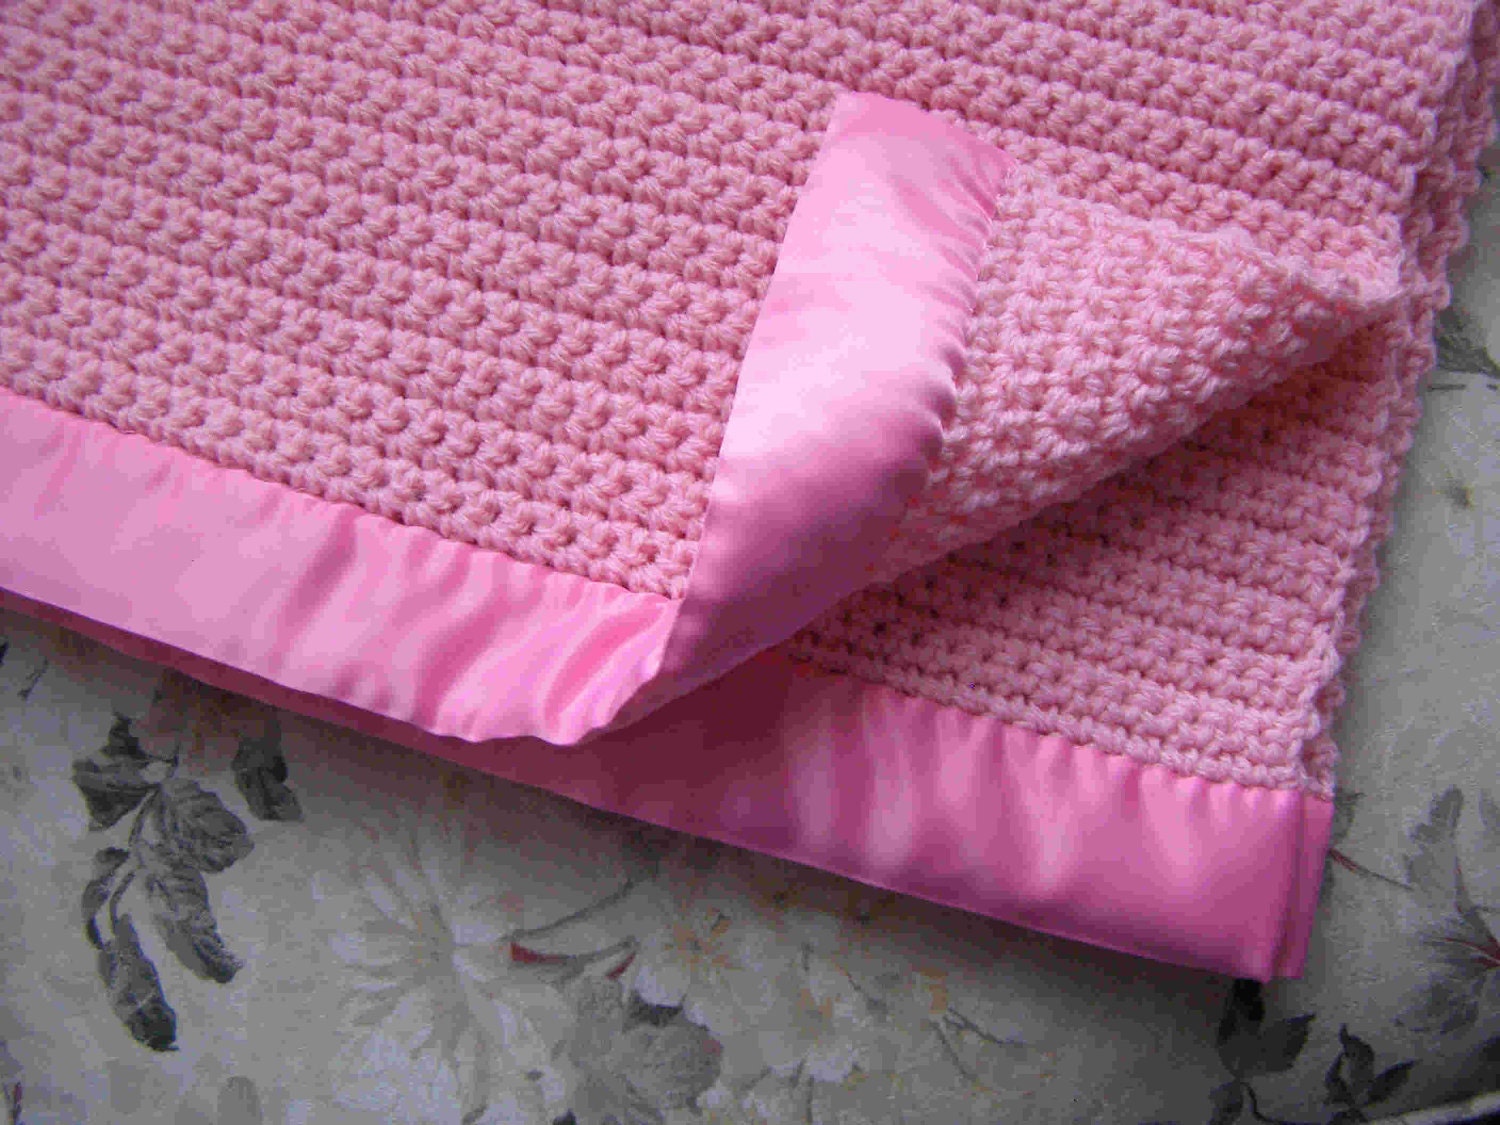 blanket sew baby Crocheted Blanket Pink Rose Warm with Baby Binding Satin